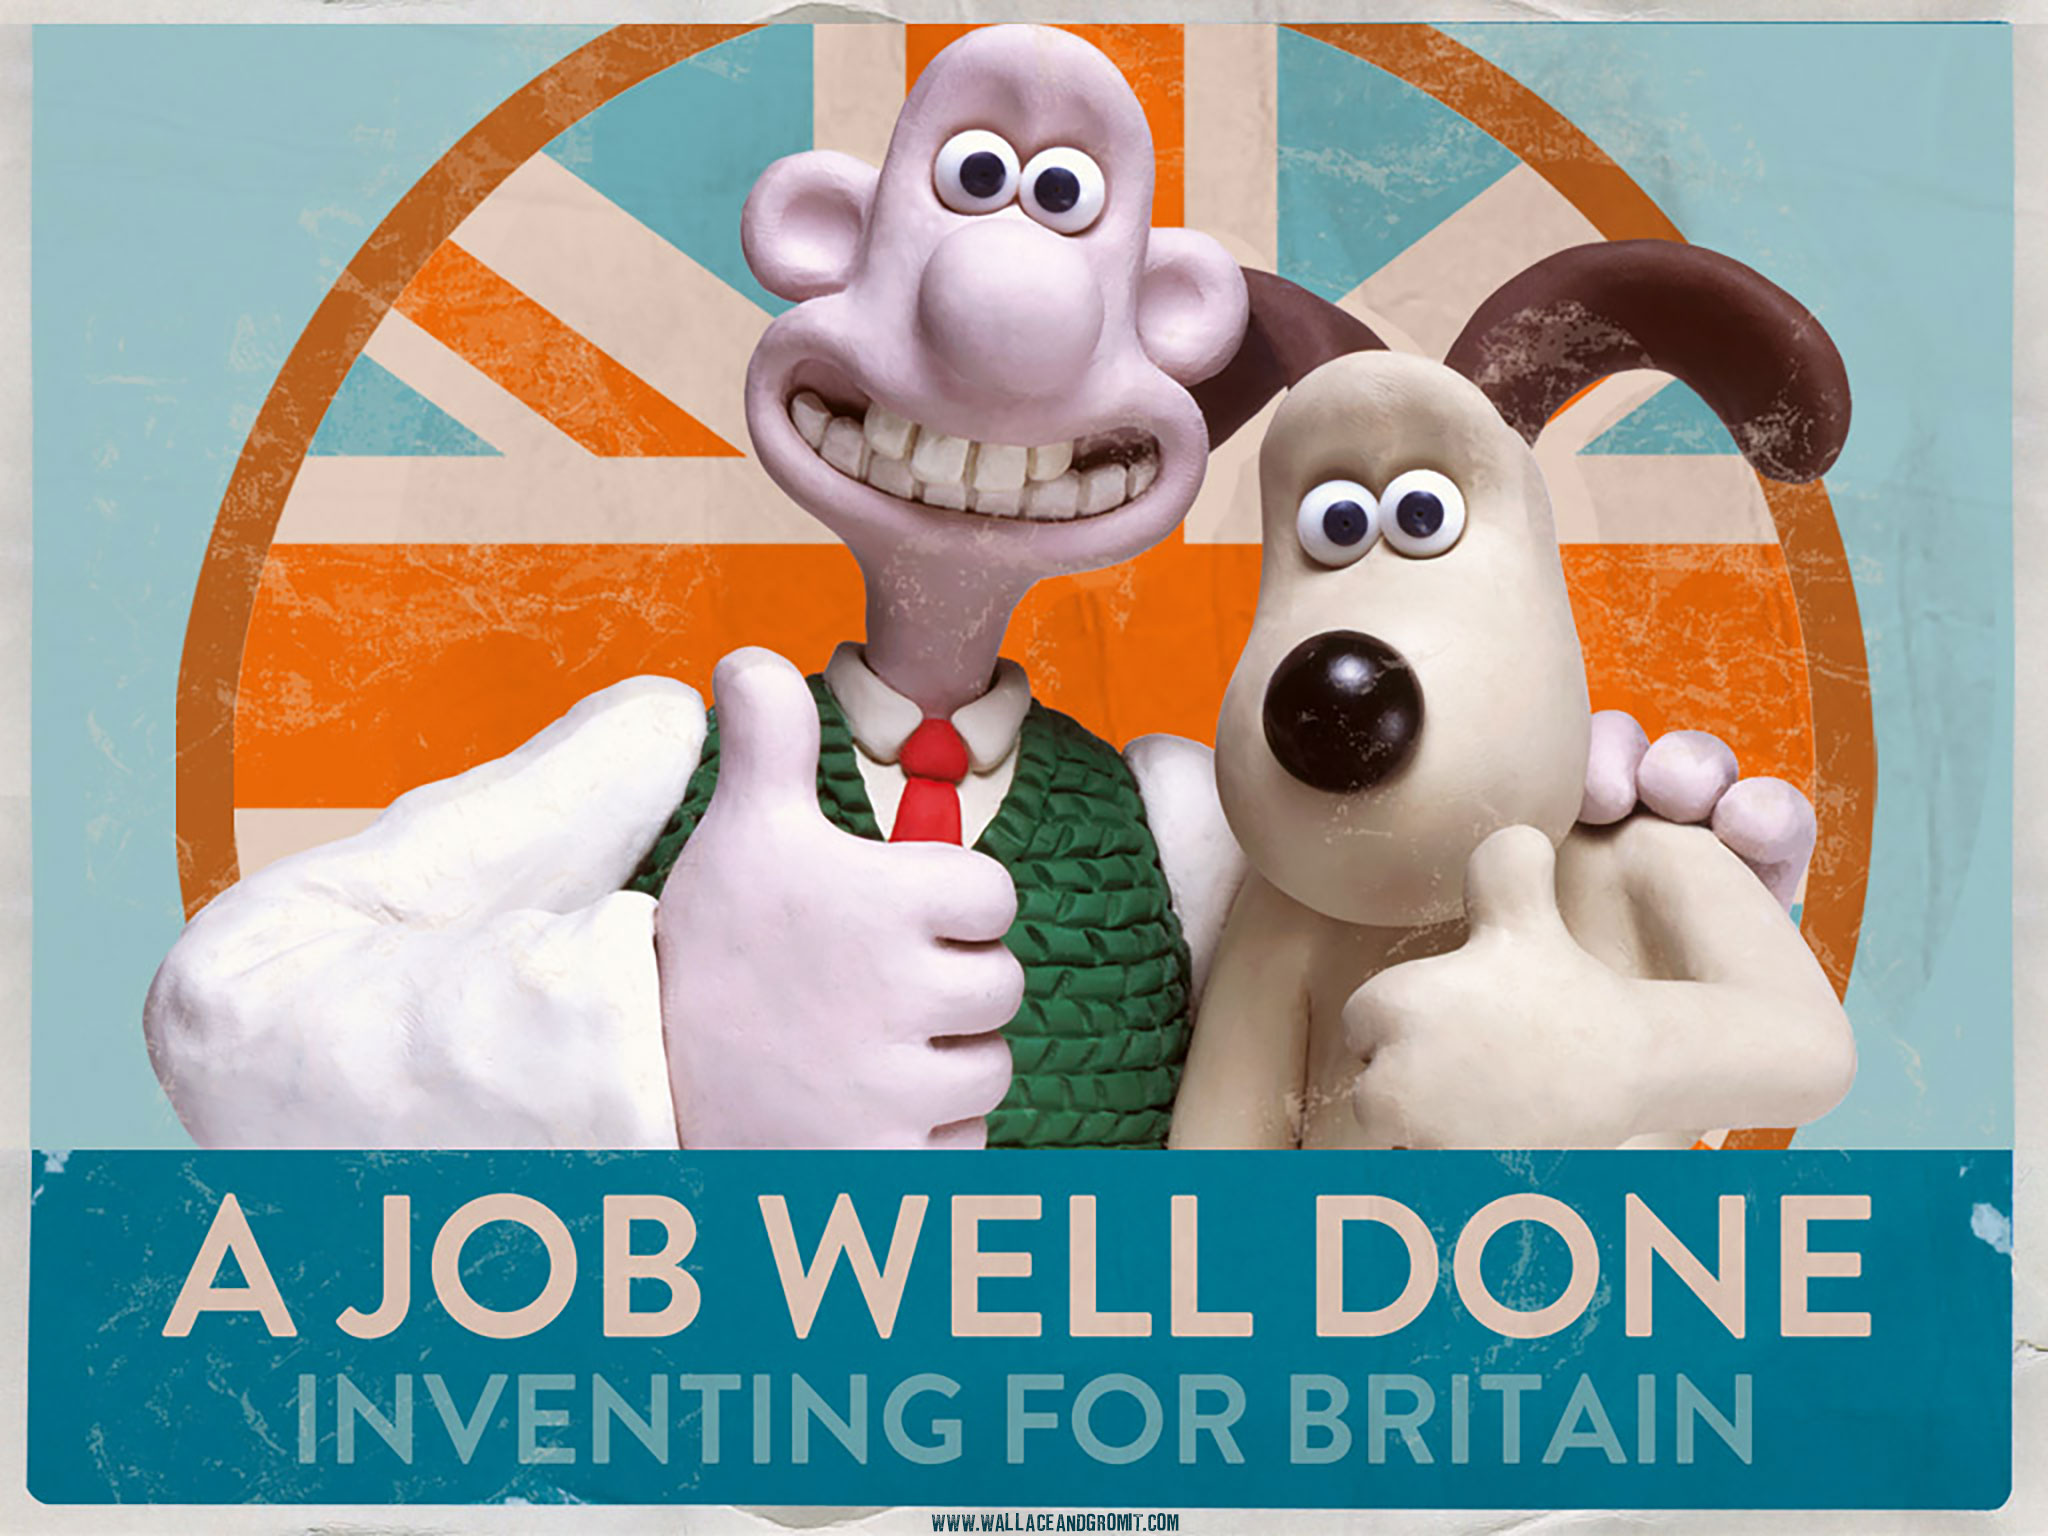 Wallpaper. Wallace and Gromit